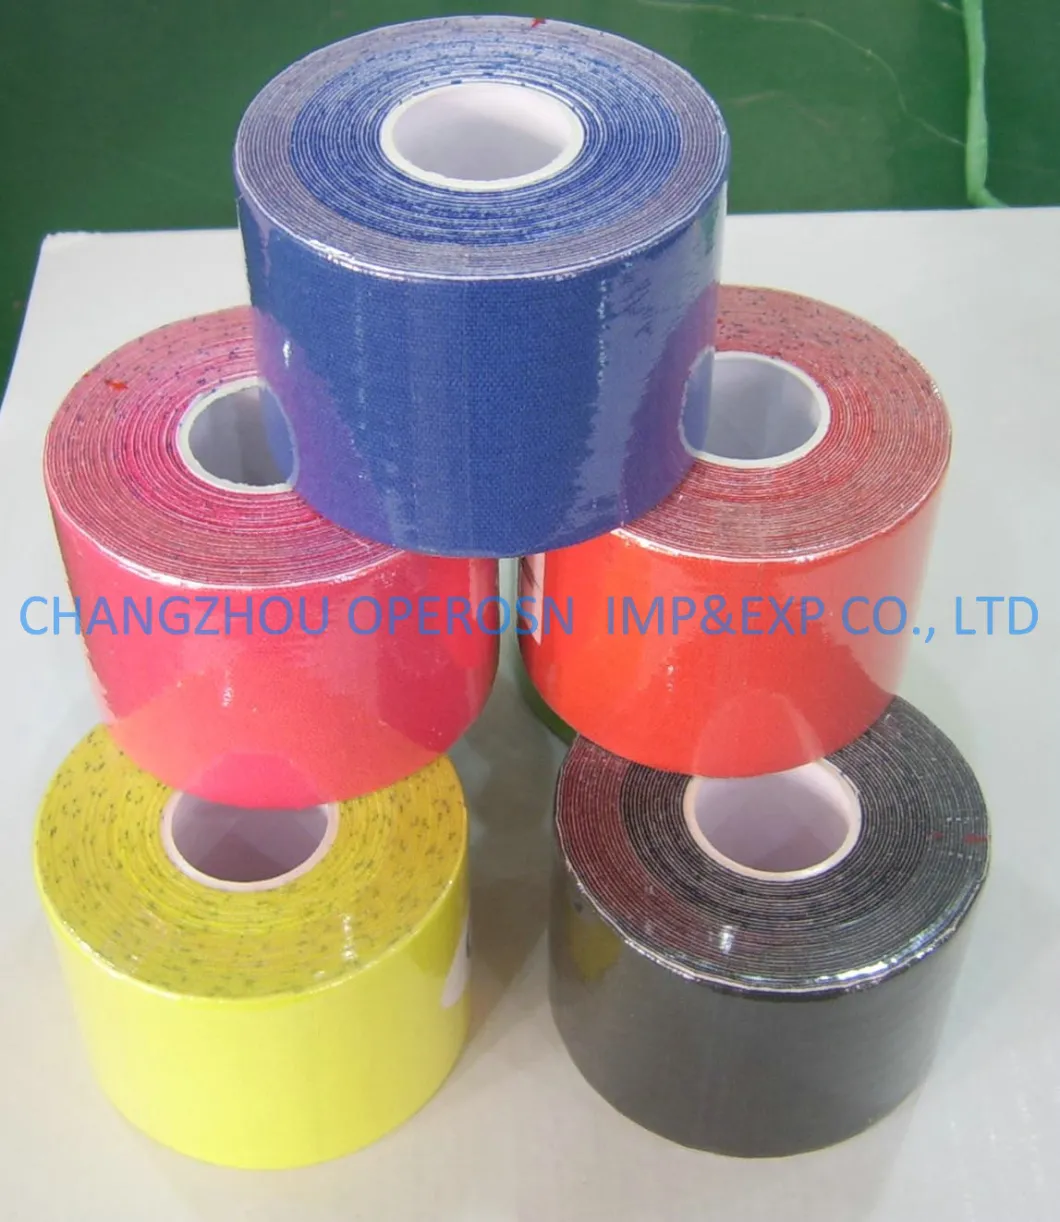 Waterproof Kinesiology Tape with High Quality and Competitive Price